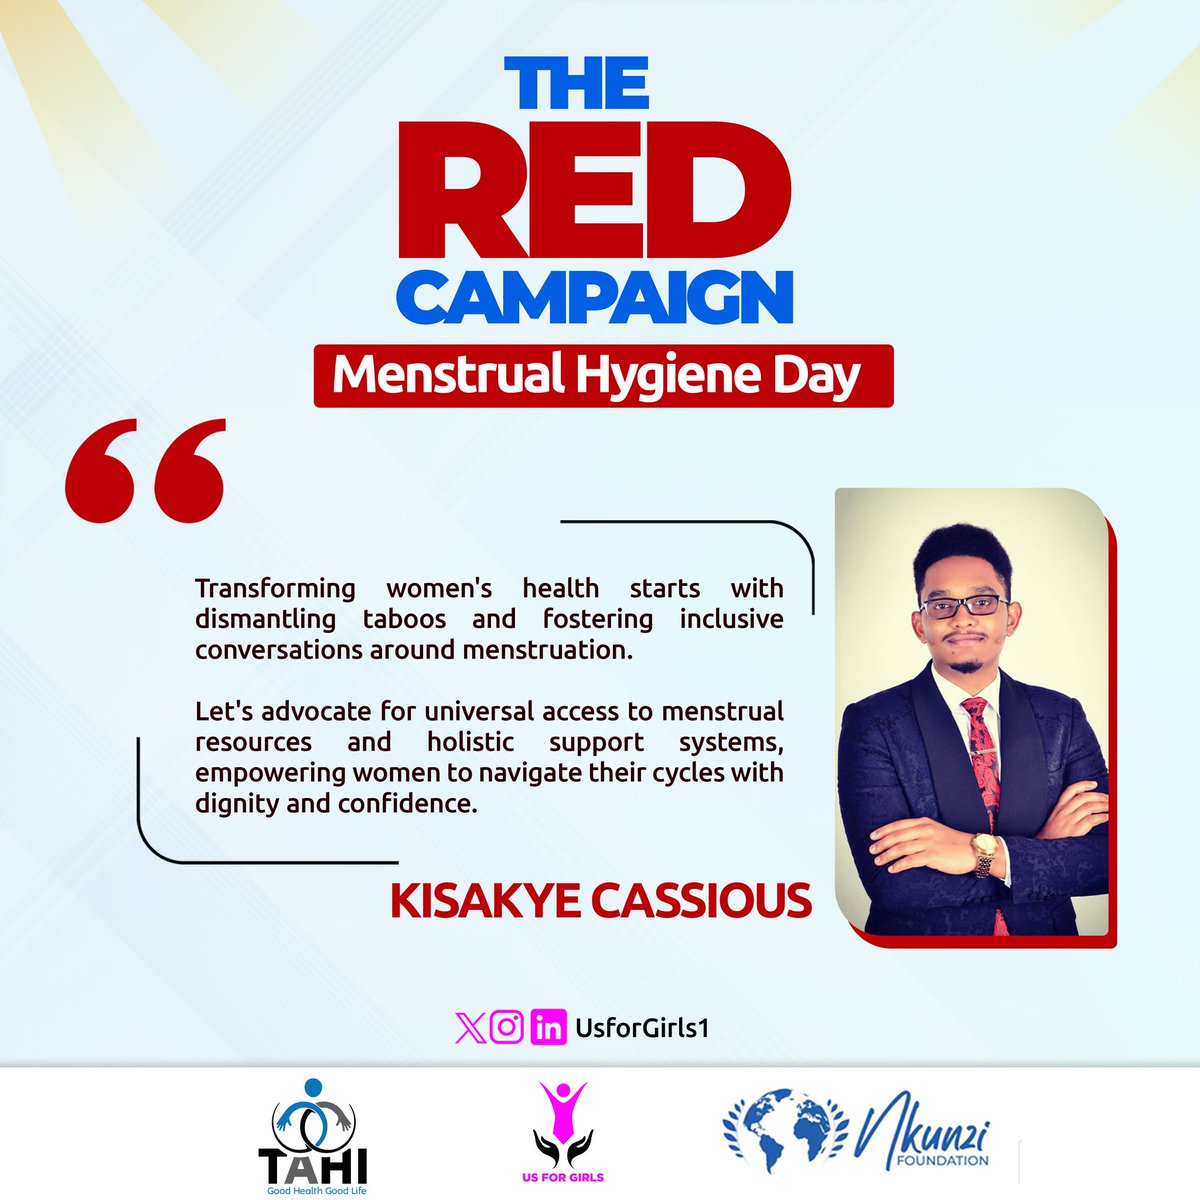 #RedCampaign

@CassiousDK urges us to have inclusive conversations around menstruation if we are to dismantle taboos and end the stigma.

#EndPeriodStigma